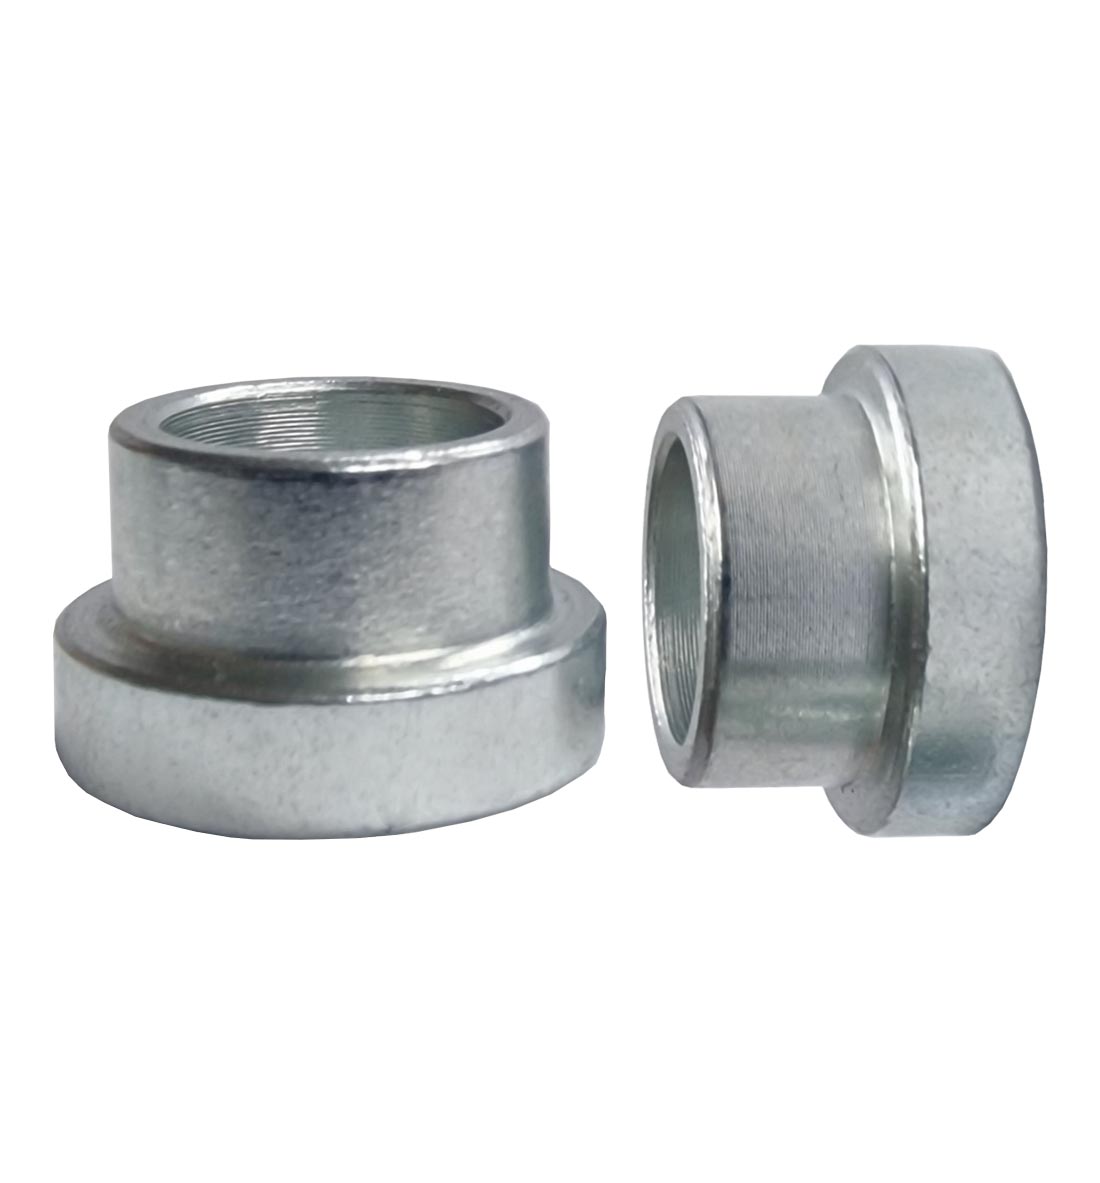 1/2" to 3/8" Top Hat Reducers - Thin